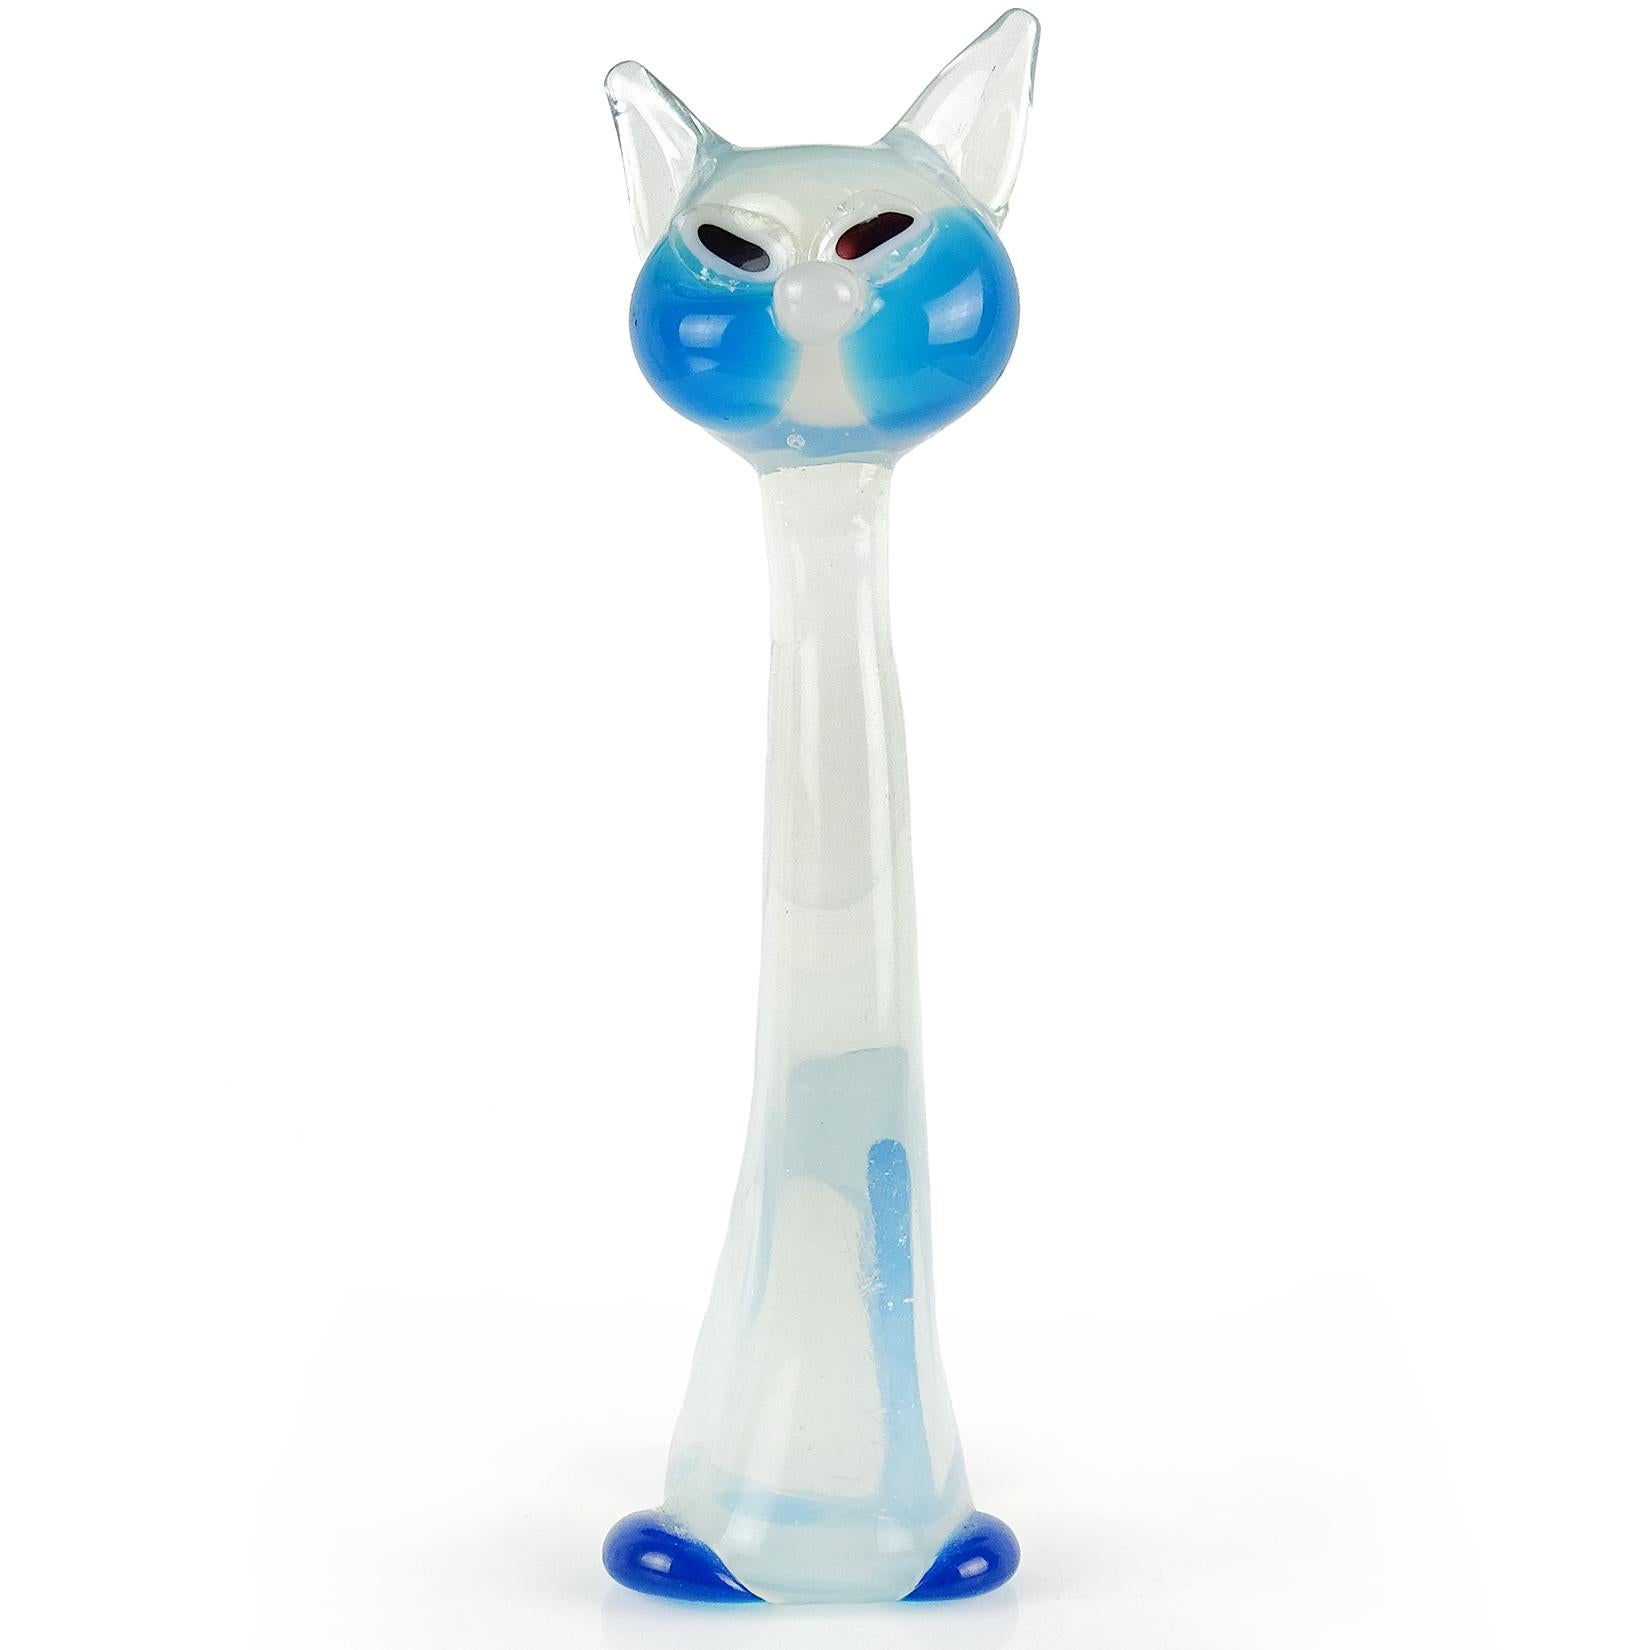 Beautiful and cute, vintage Murano hand blown opalescent white with blue accents Italian art glass kitty cat figurine sculpture. Documented to the Barovier e Toso company. The piece has a cartoonish appearance, with elongated neck and cut black /